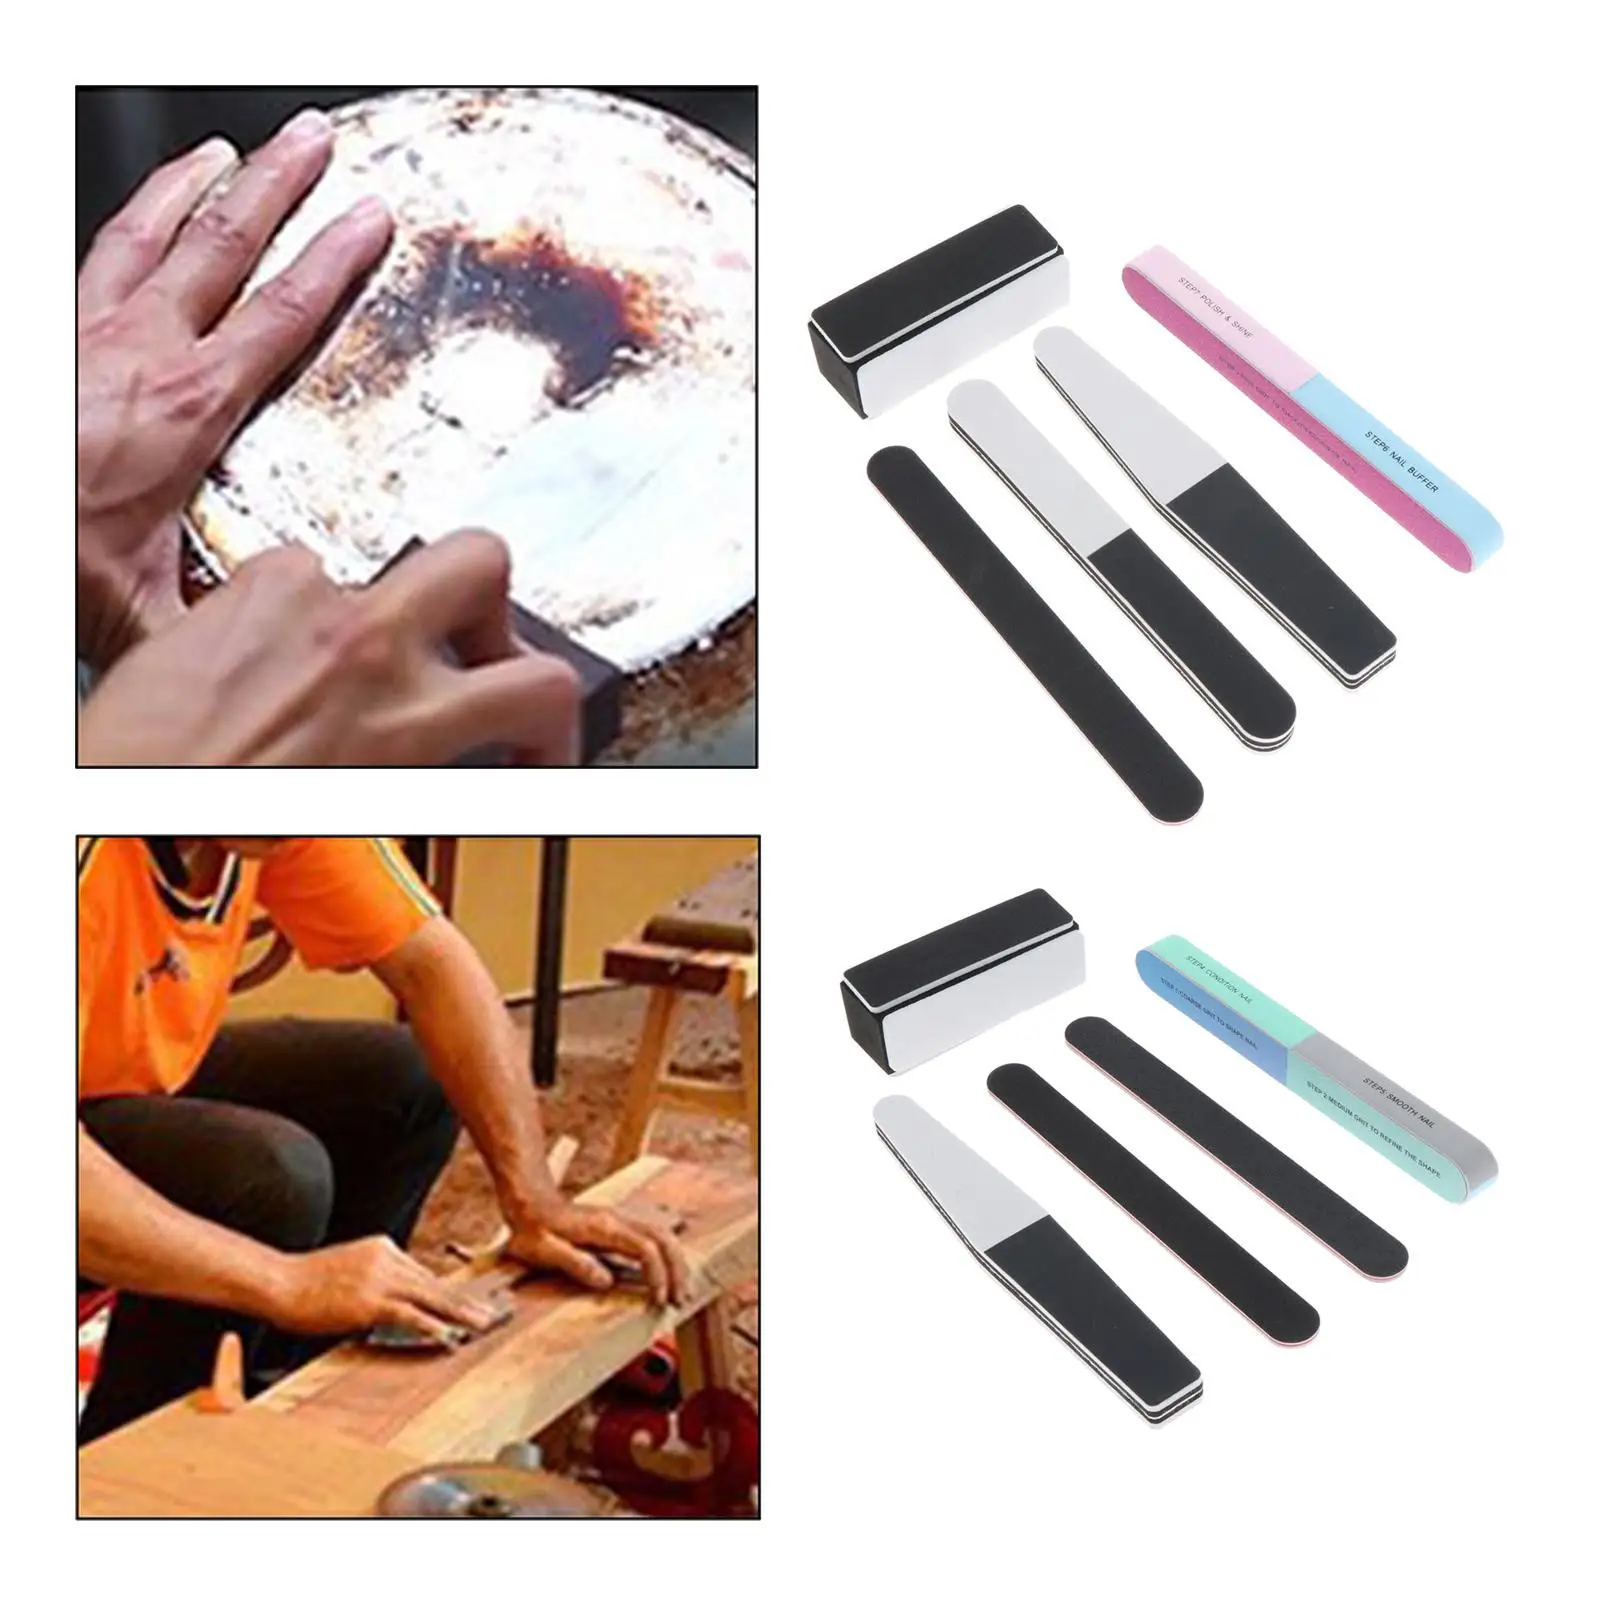 Model Tools Grinding Points Nail Files Grinding Grinding Buffer Block Modeling Tool Sets